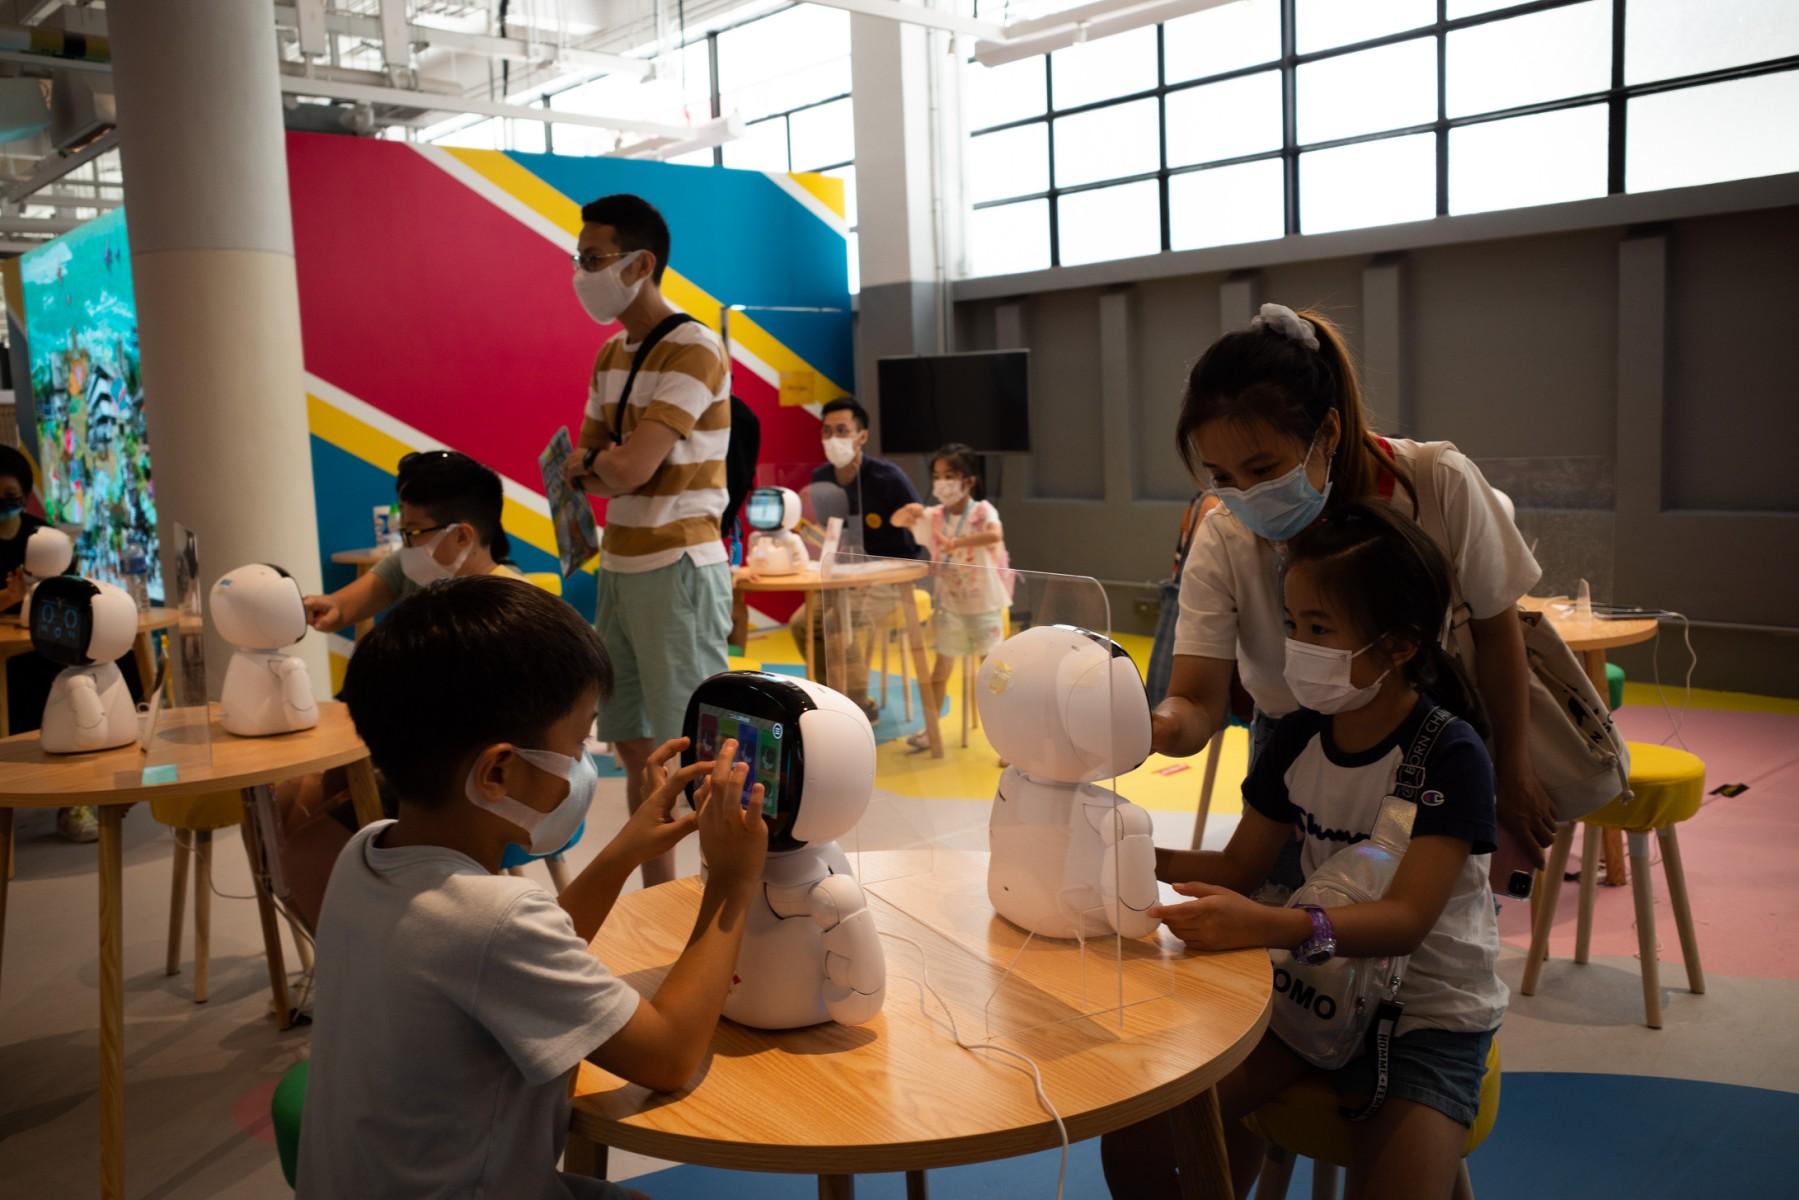 Children play with a robotic machine at the reopened Central Market after its makeover, in Hong Kong on August 26, 2021. Photo: AFP